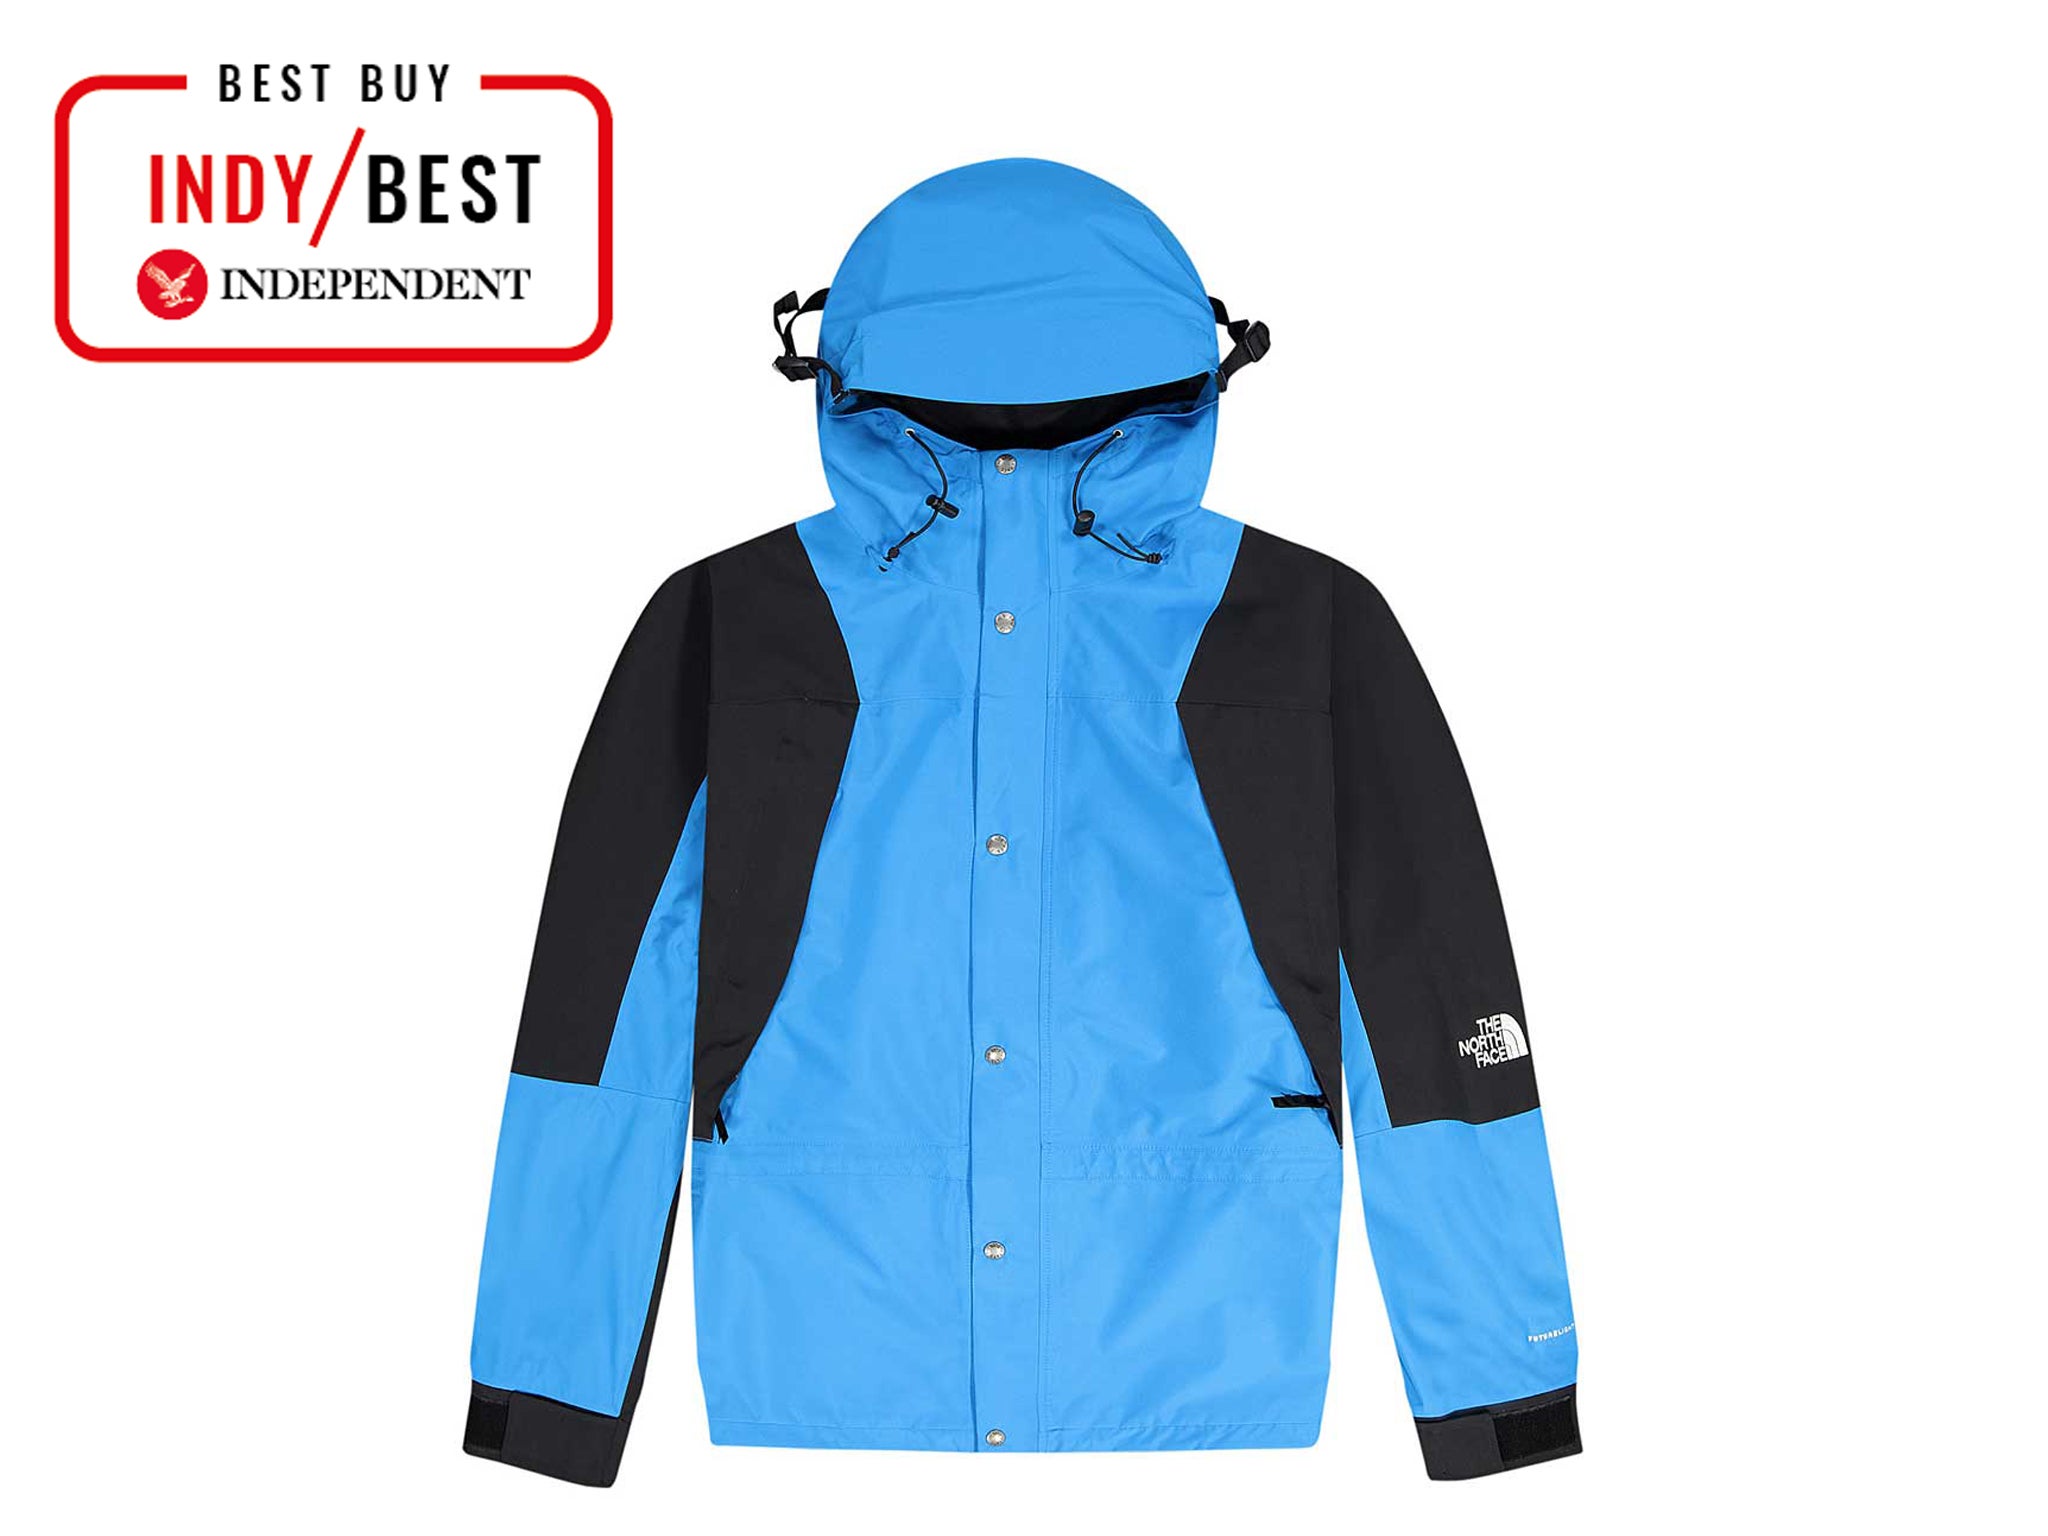 Breathable but waterproof, this jacket is a must-have for outdoor excursions